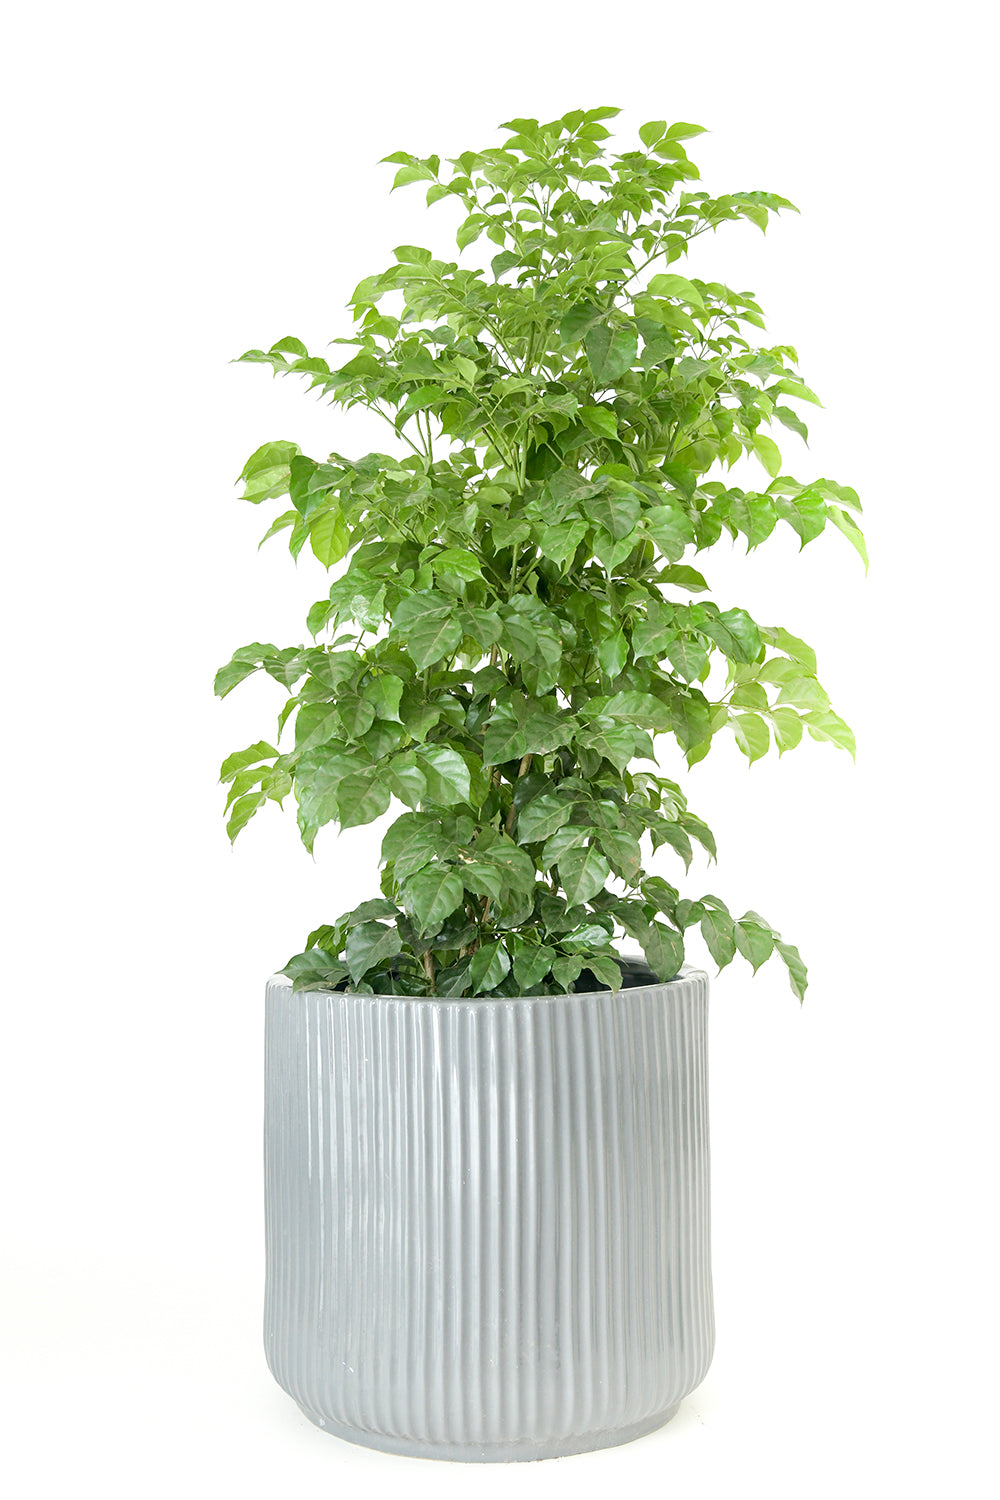 Extra Large size Pheonix Ceramic planter in Grey color with Ficus Plant in it.